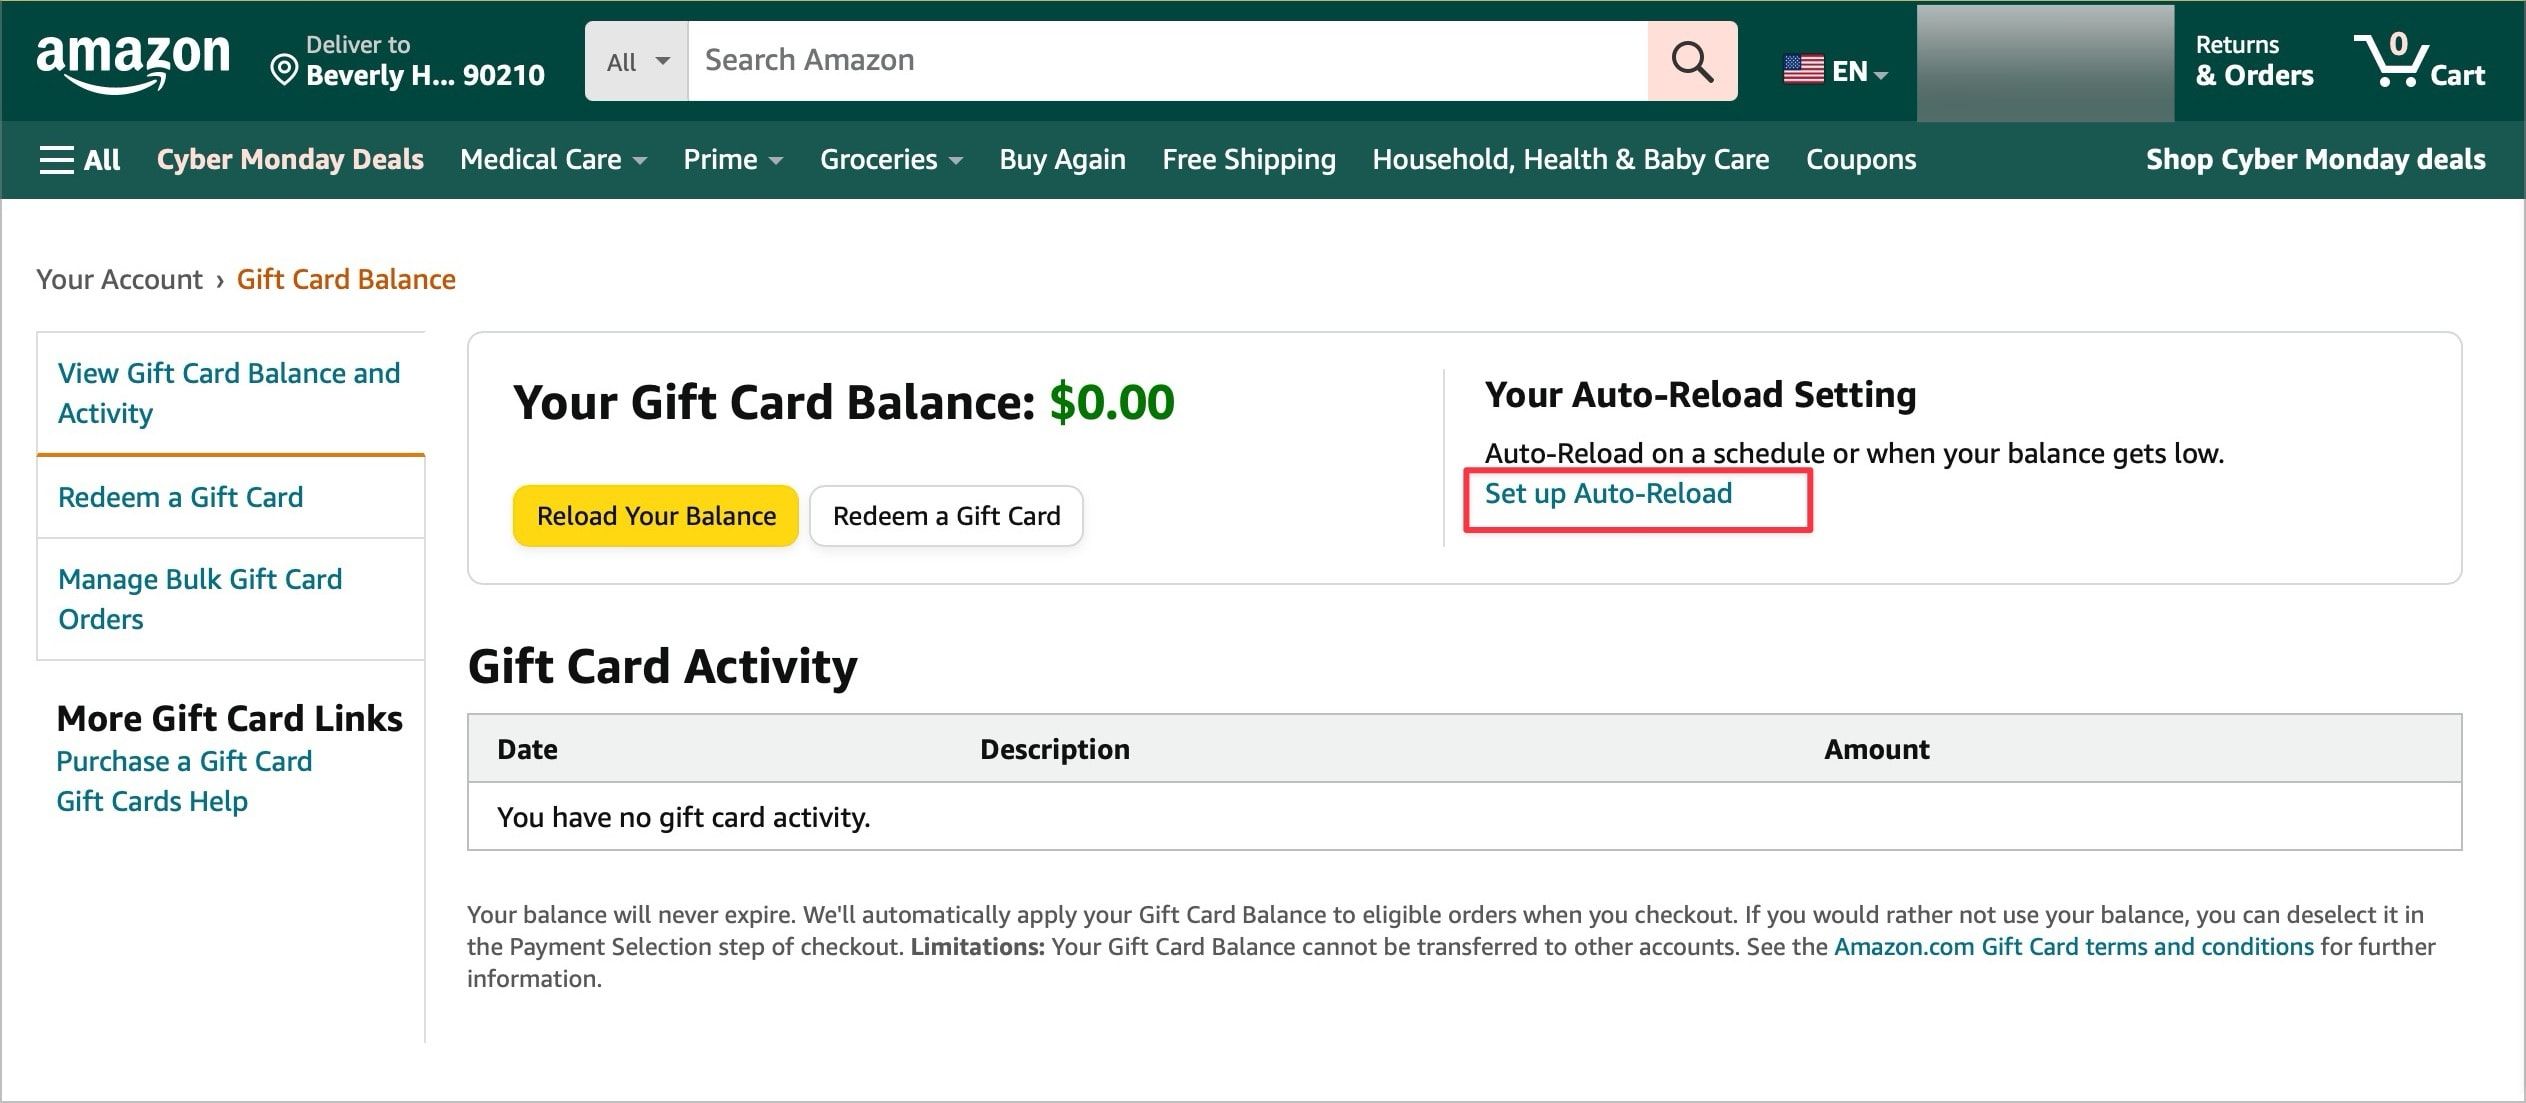 Free $12 Amazon Credit with $100 Gift Card Reload | FreebieShark.com